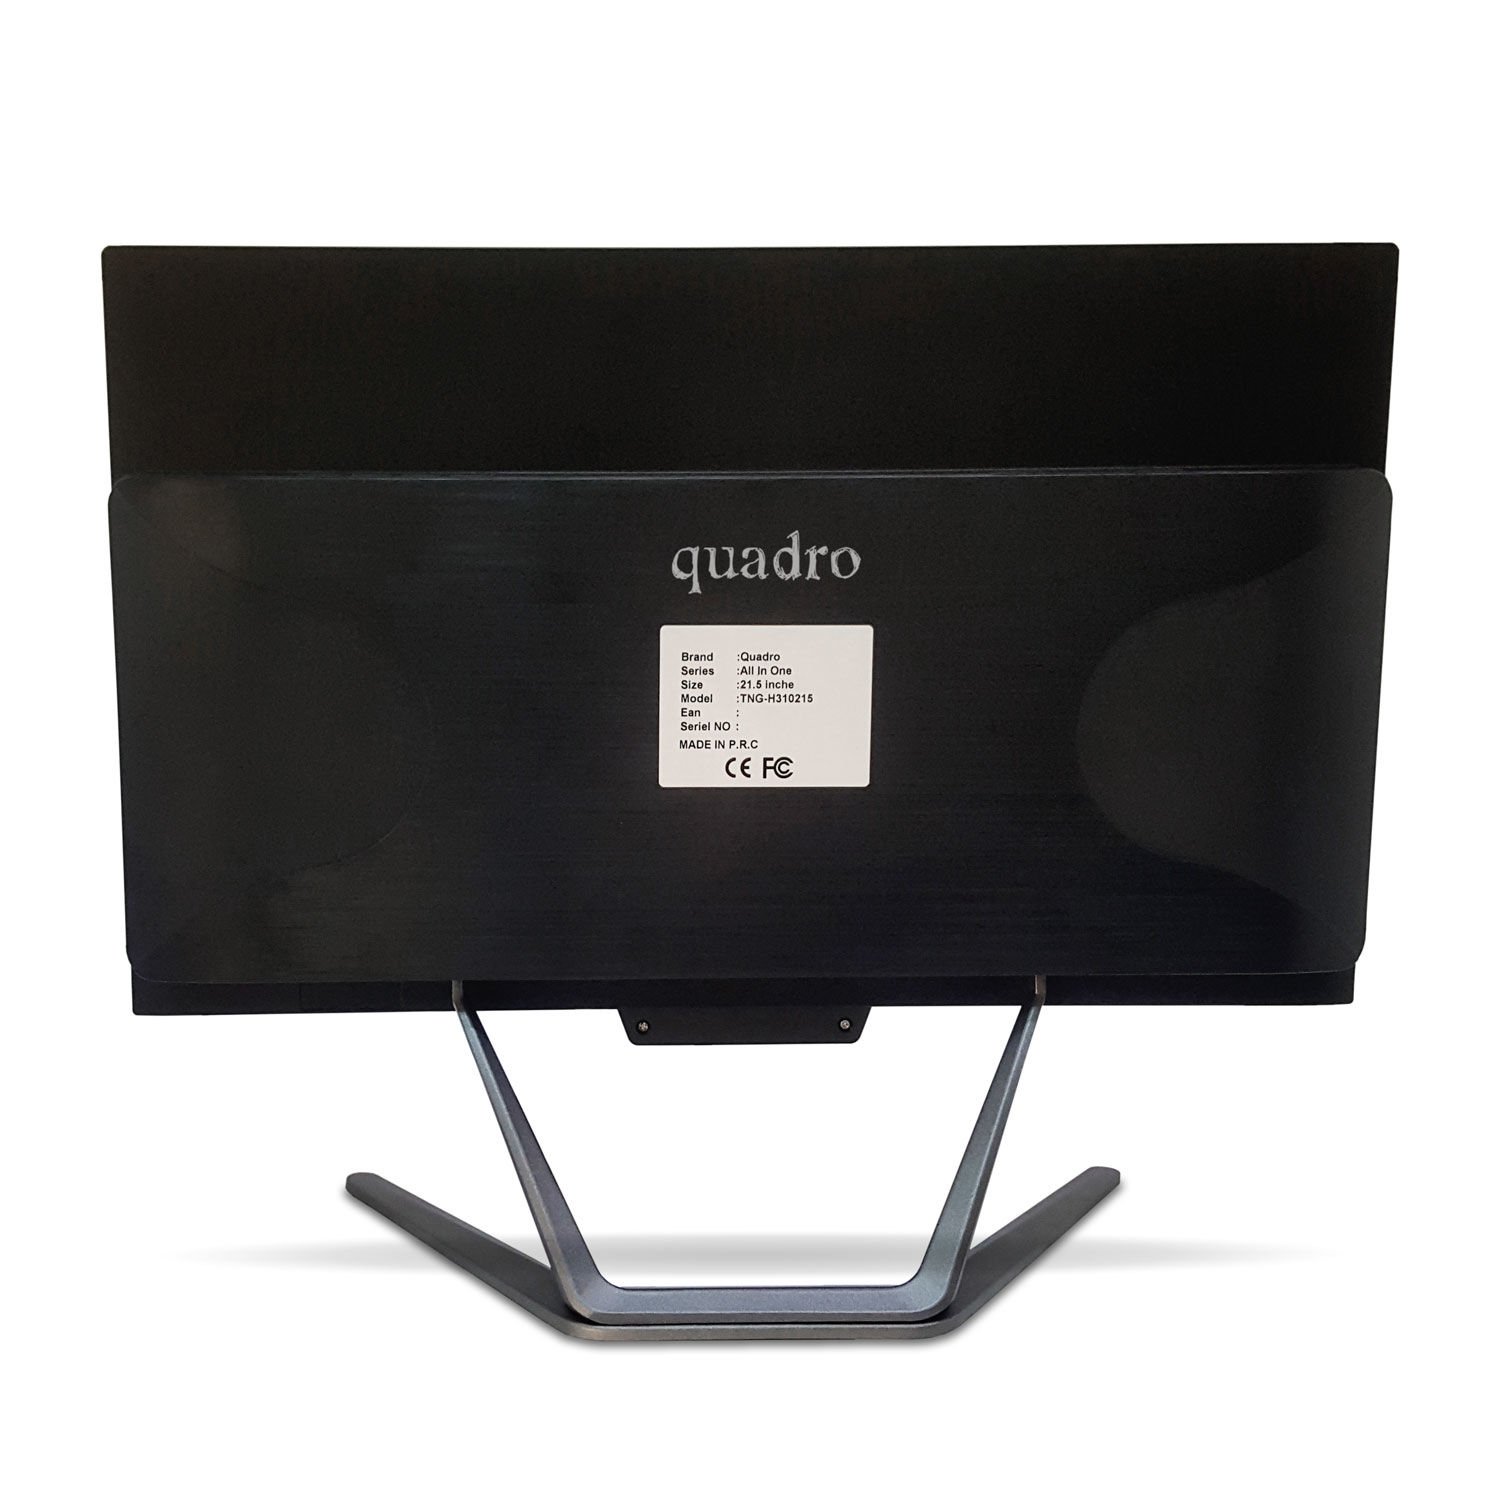 QUADRO STARK H8122 40824 I3-4130T 8GB 240SSD 21.5'' IPS NONTOUCH FREE-DOS ALL IN ONE PC